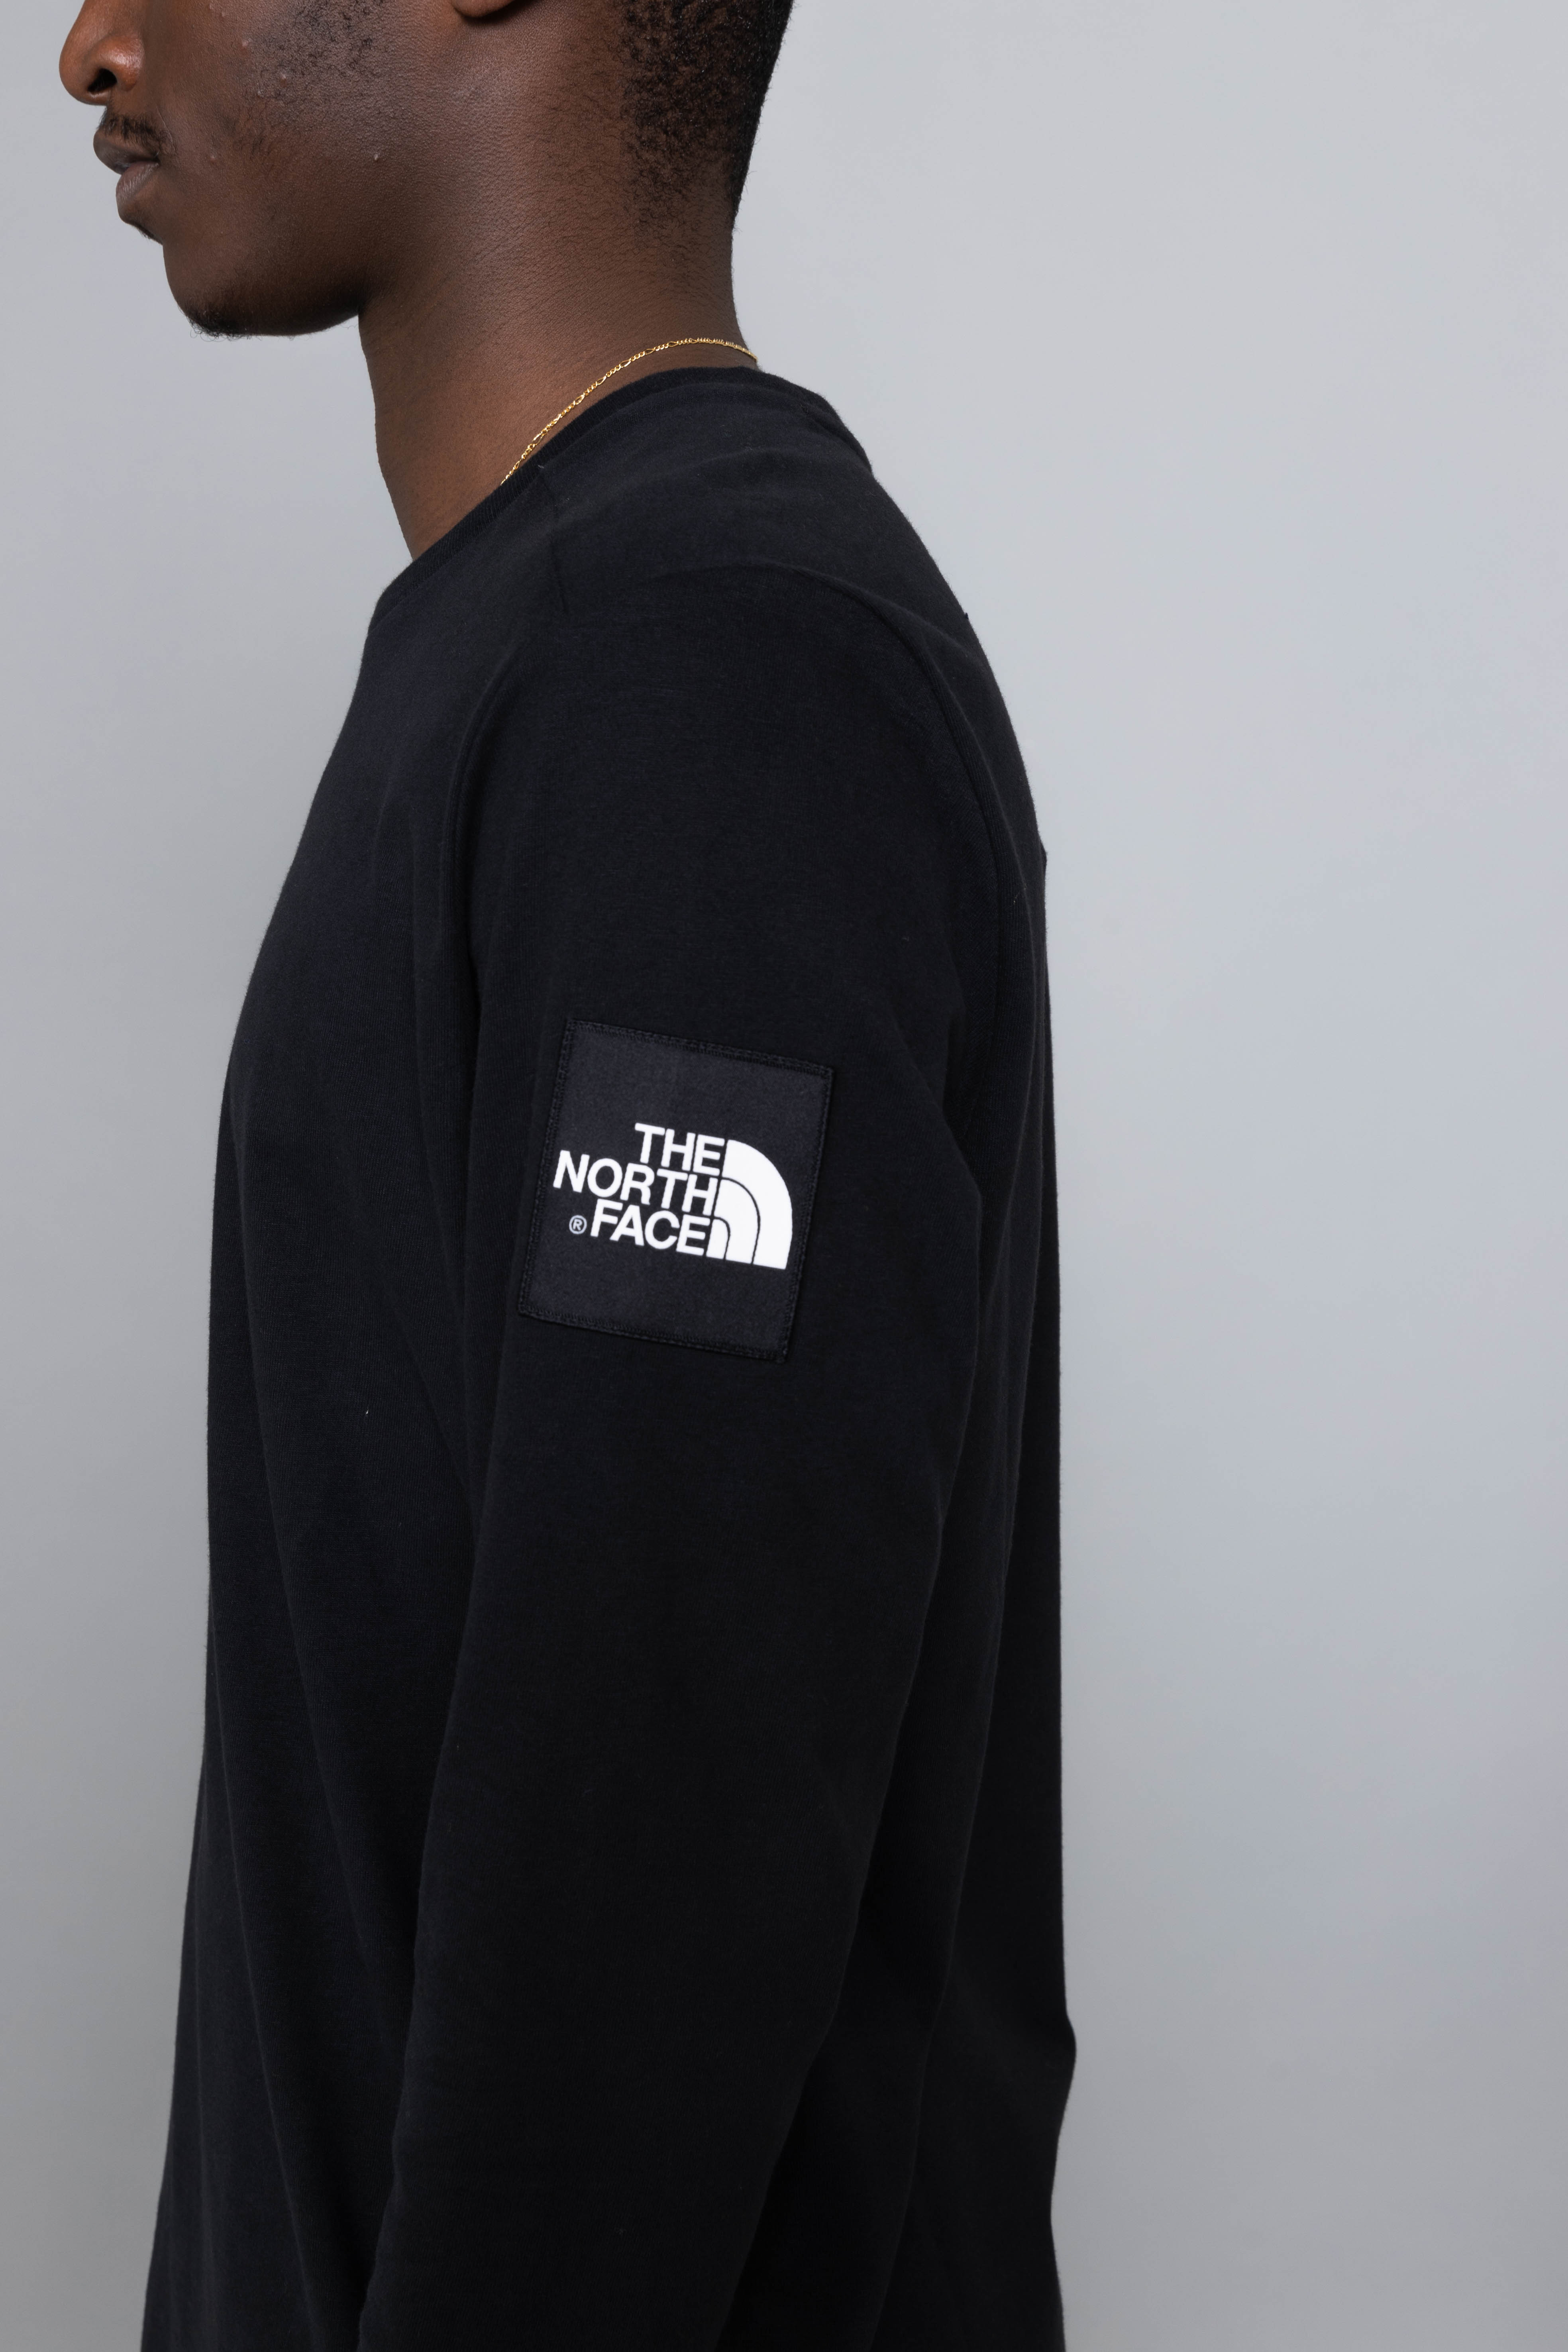 north face fine 2 long sleeve